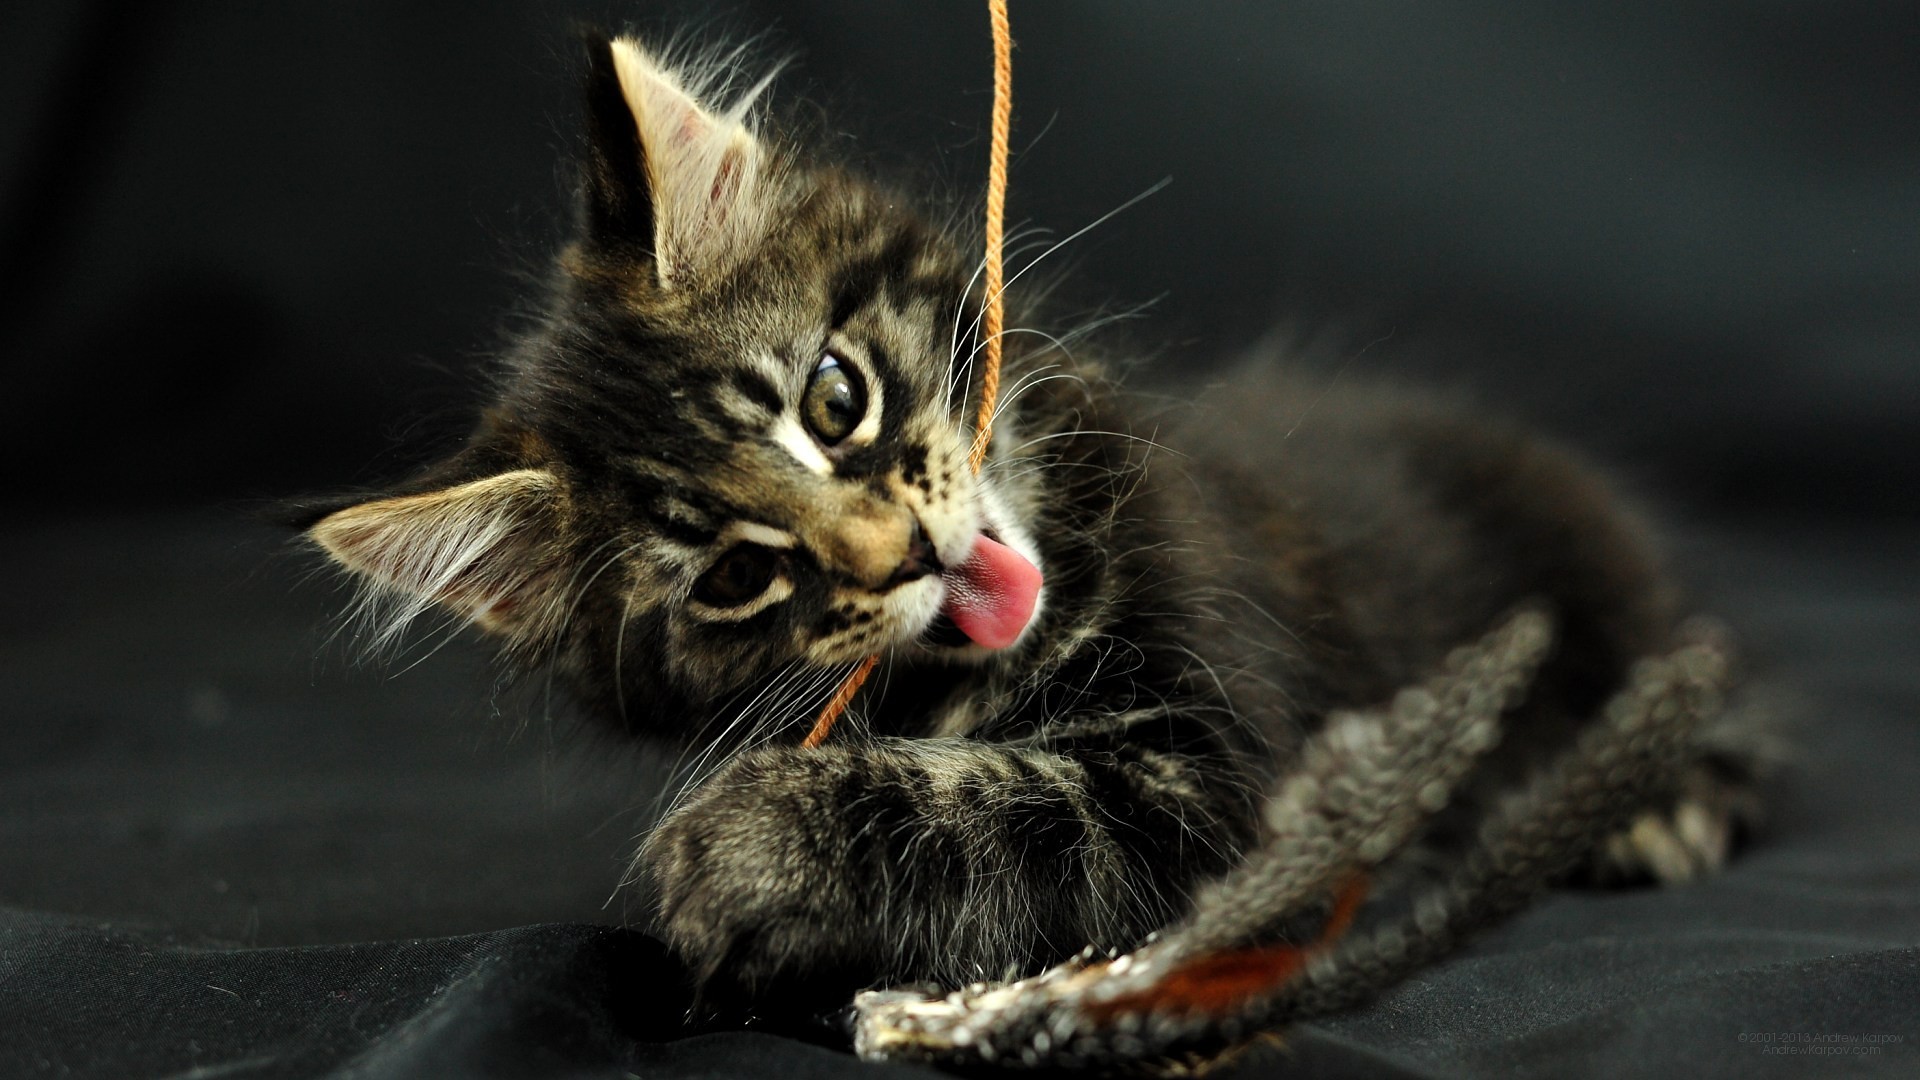 1920x1080 Pictures lolcat Funny Cat desktop wallpaper picture 1920 x 1080 Odin, Maine  Coon kitten